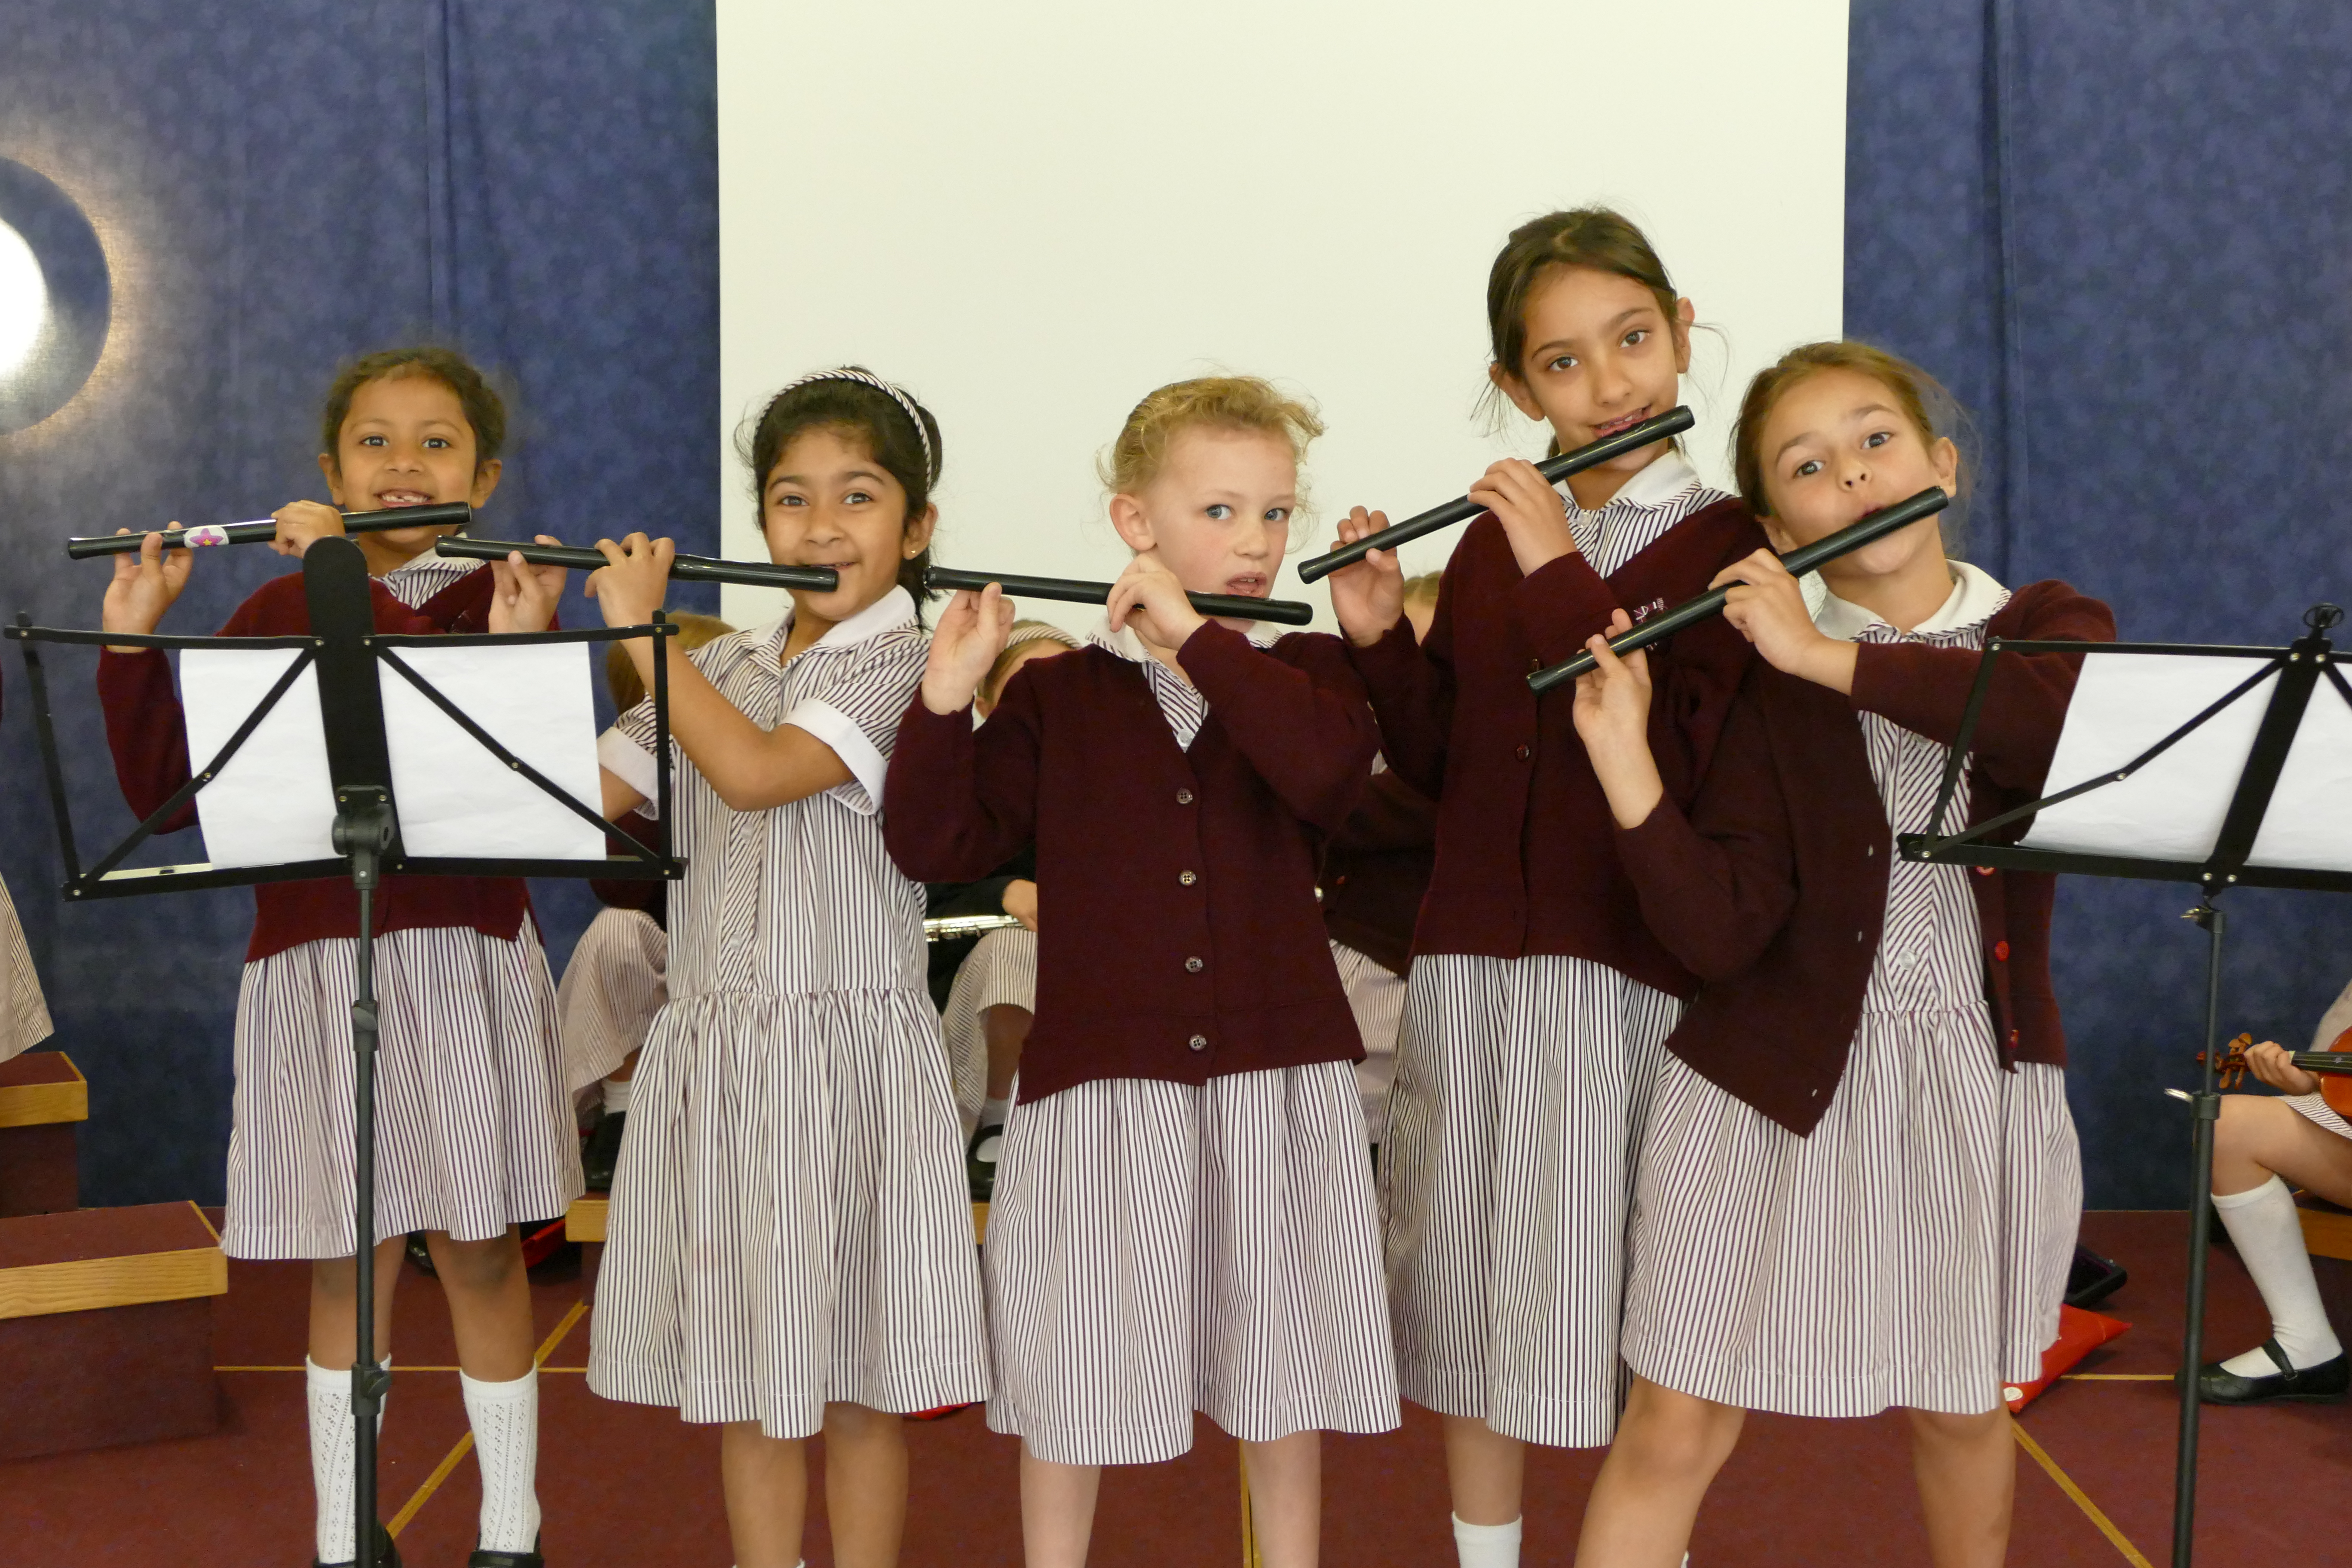 Year 2 Fife players perform at the Pre-Prep Music Assembly, 25th May 2016